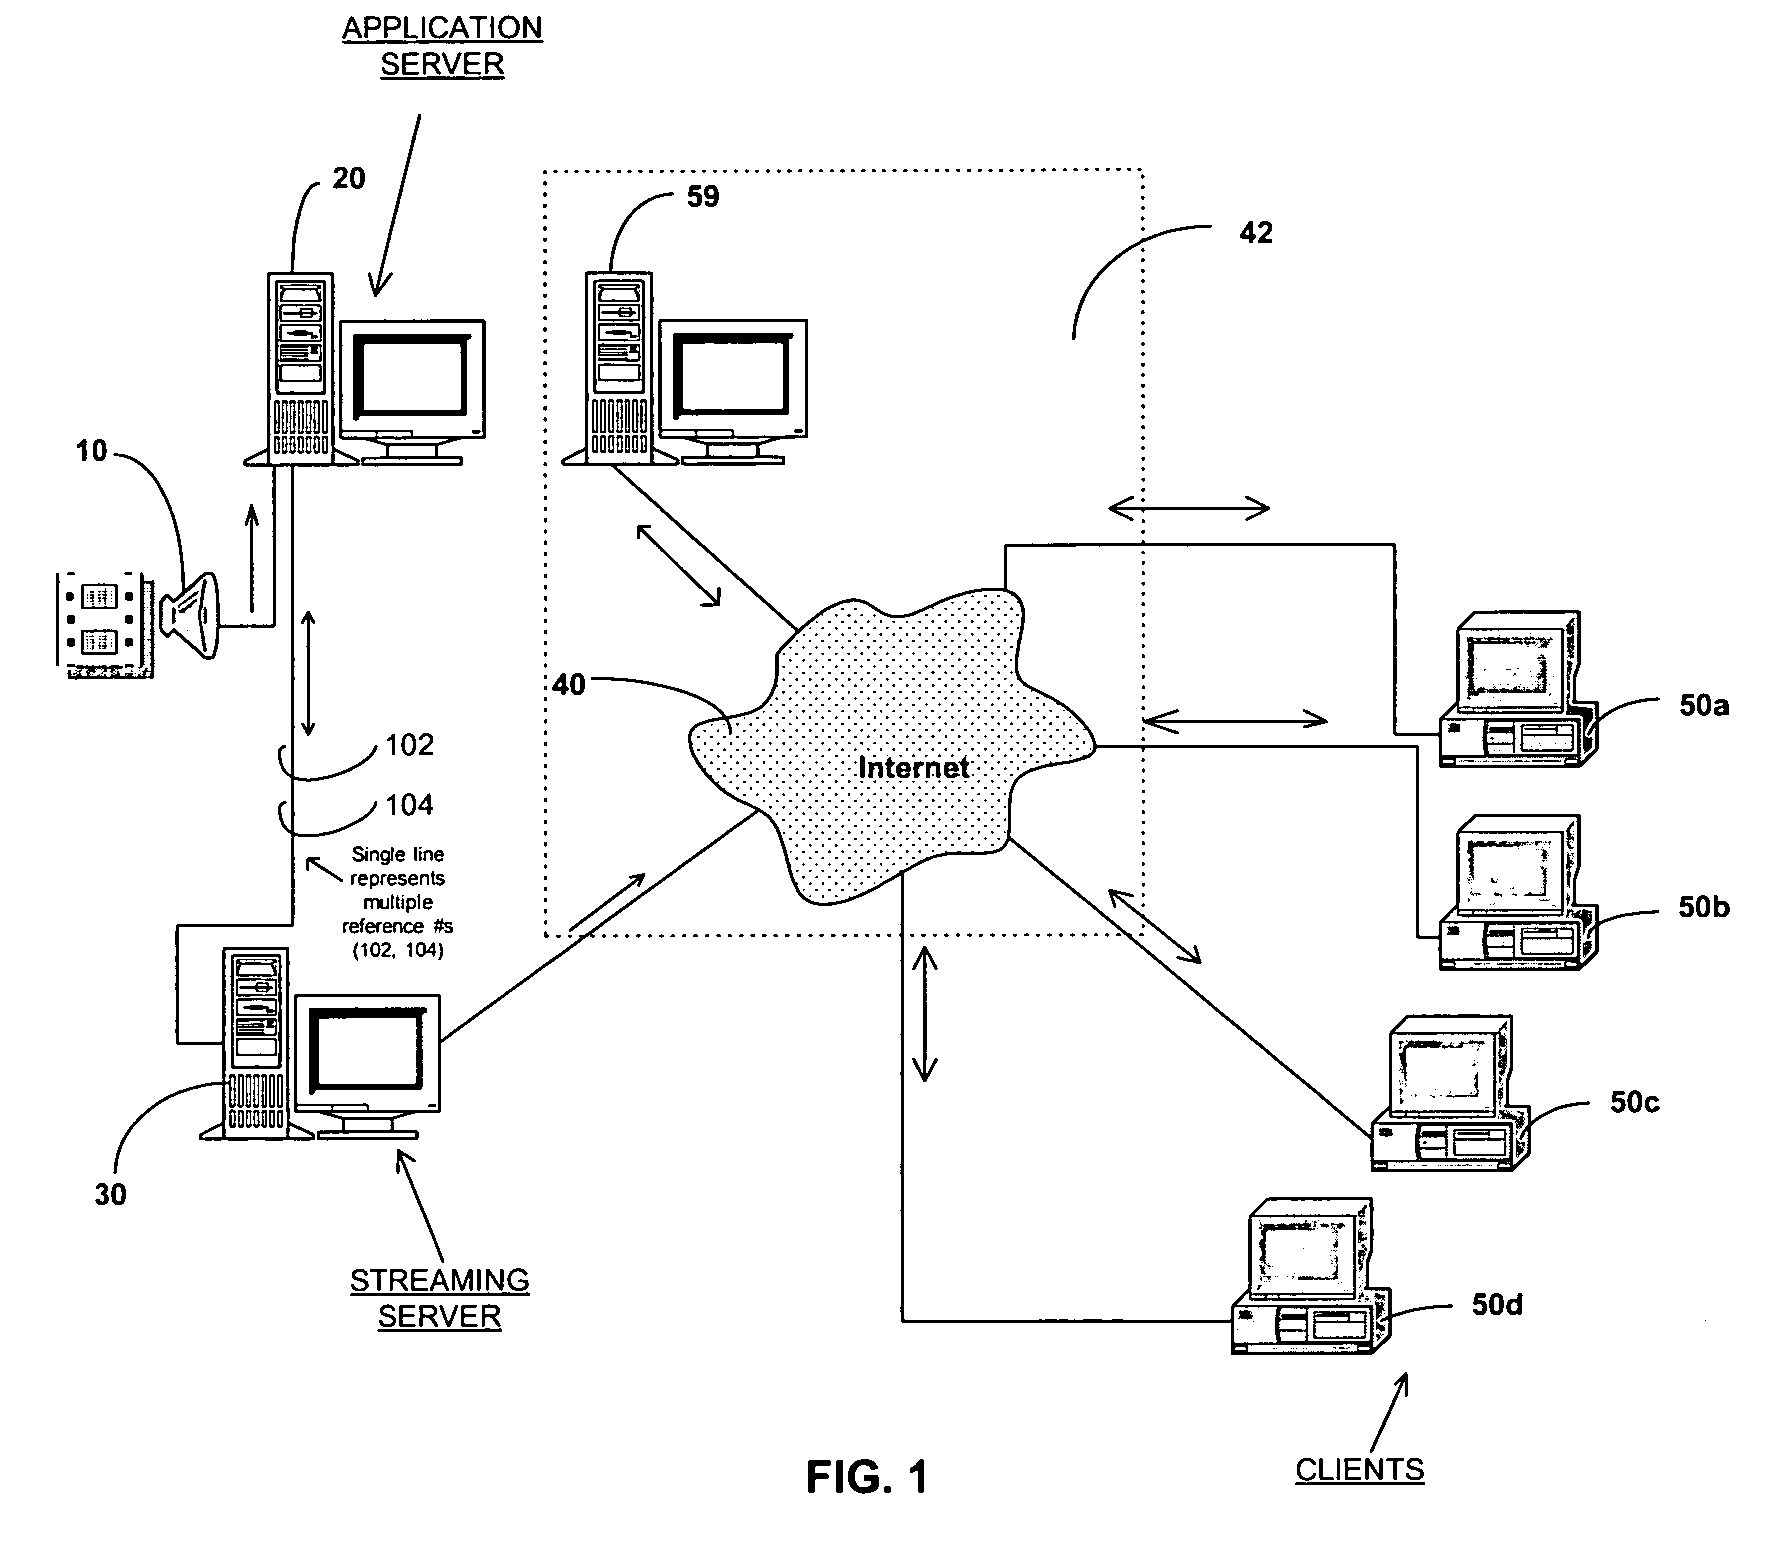 Application server and streaming server streaming multimedia file in a client specific format